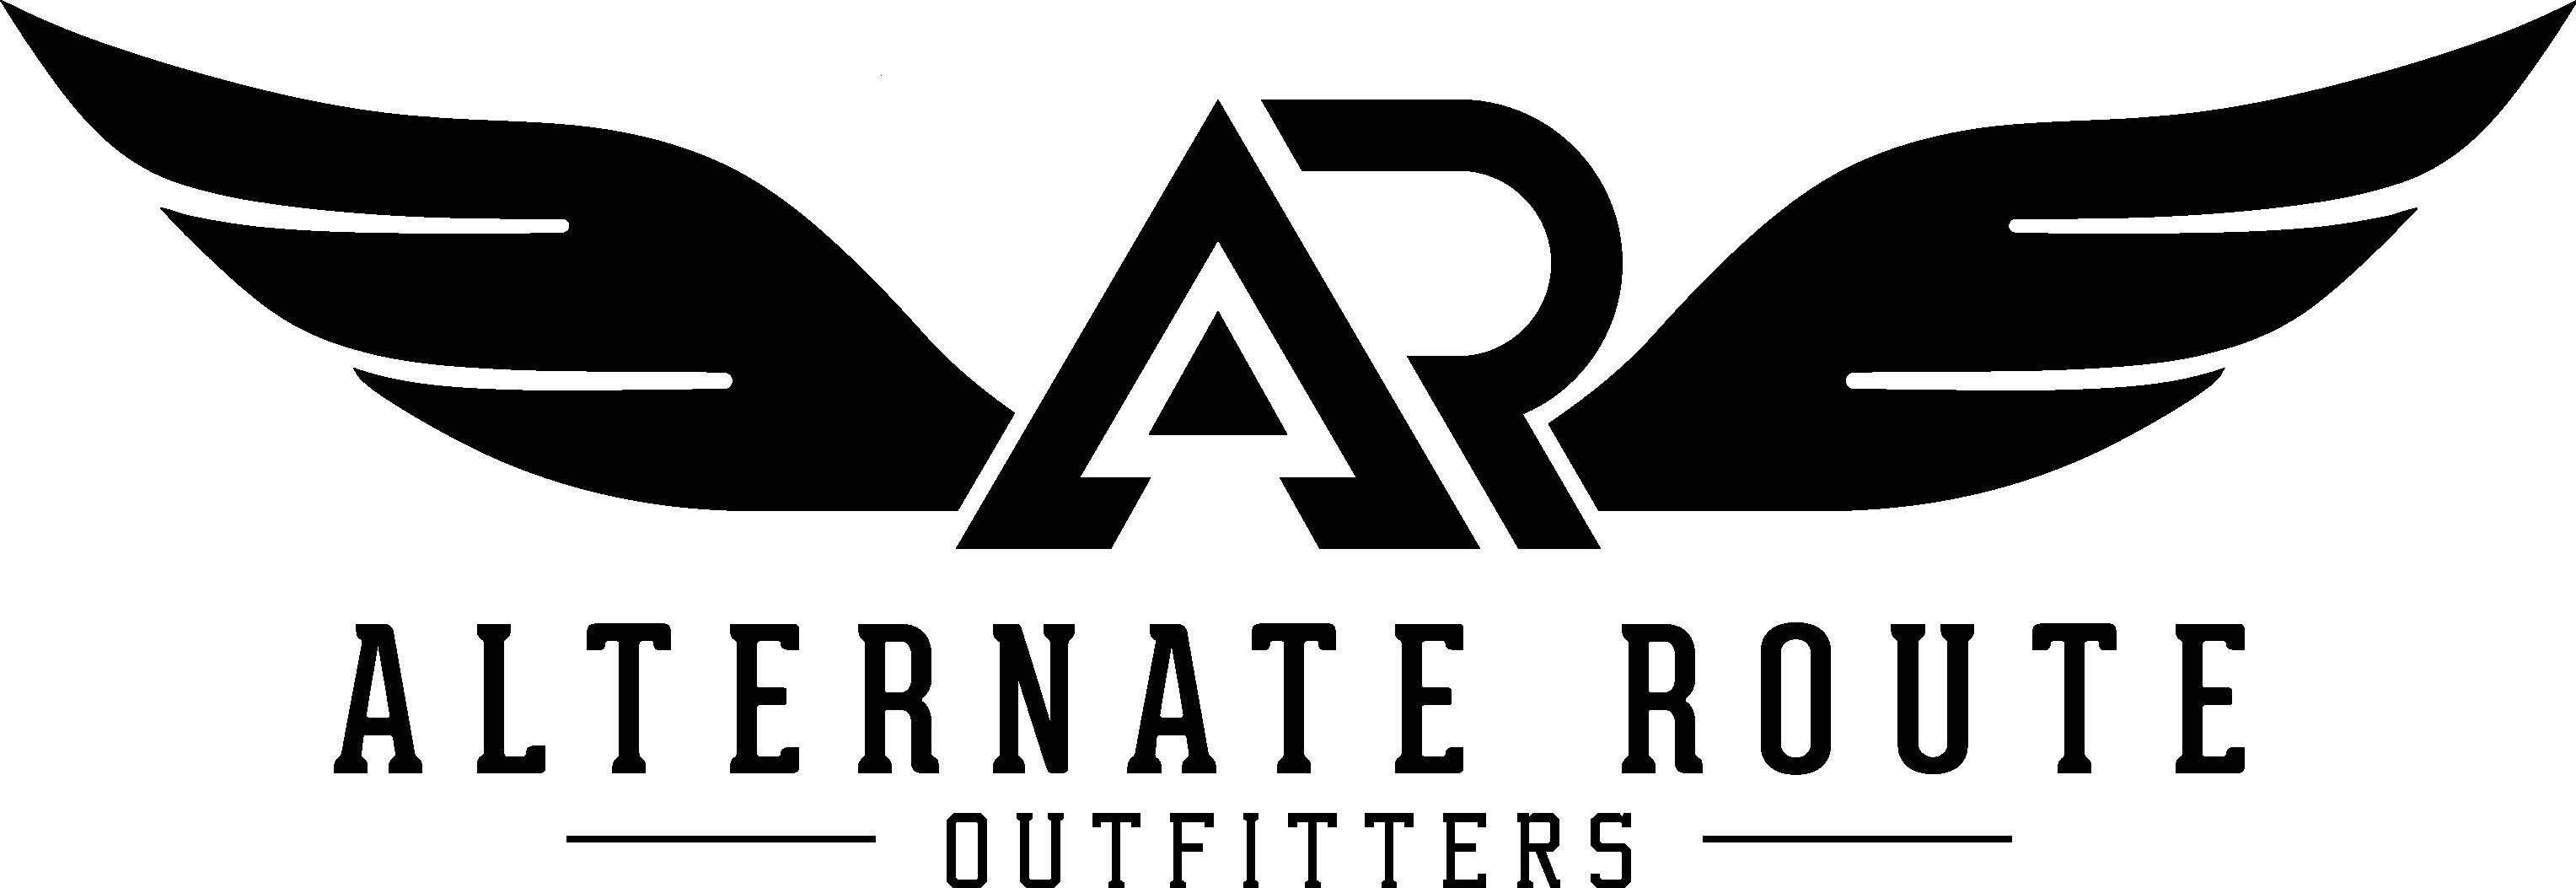 Alternate Route Outfitters